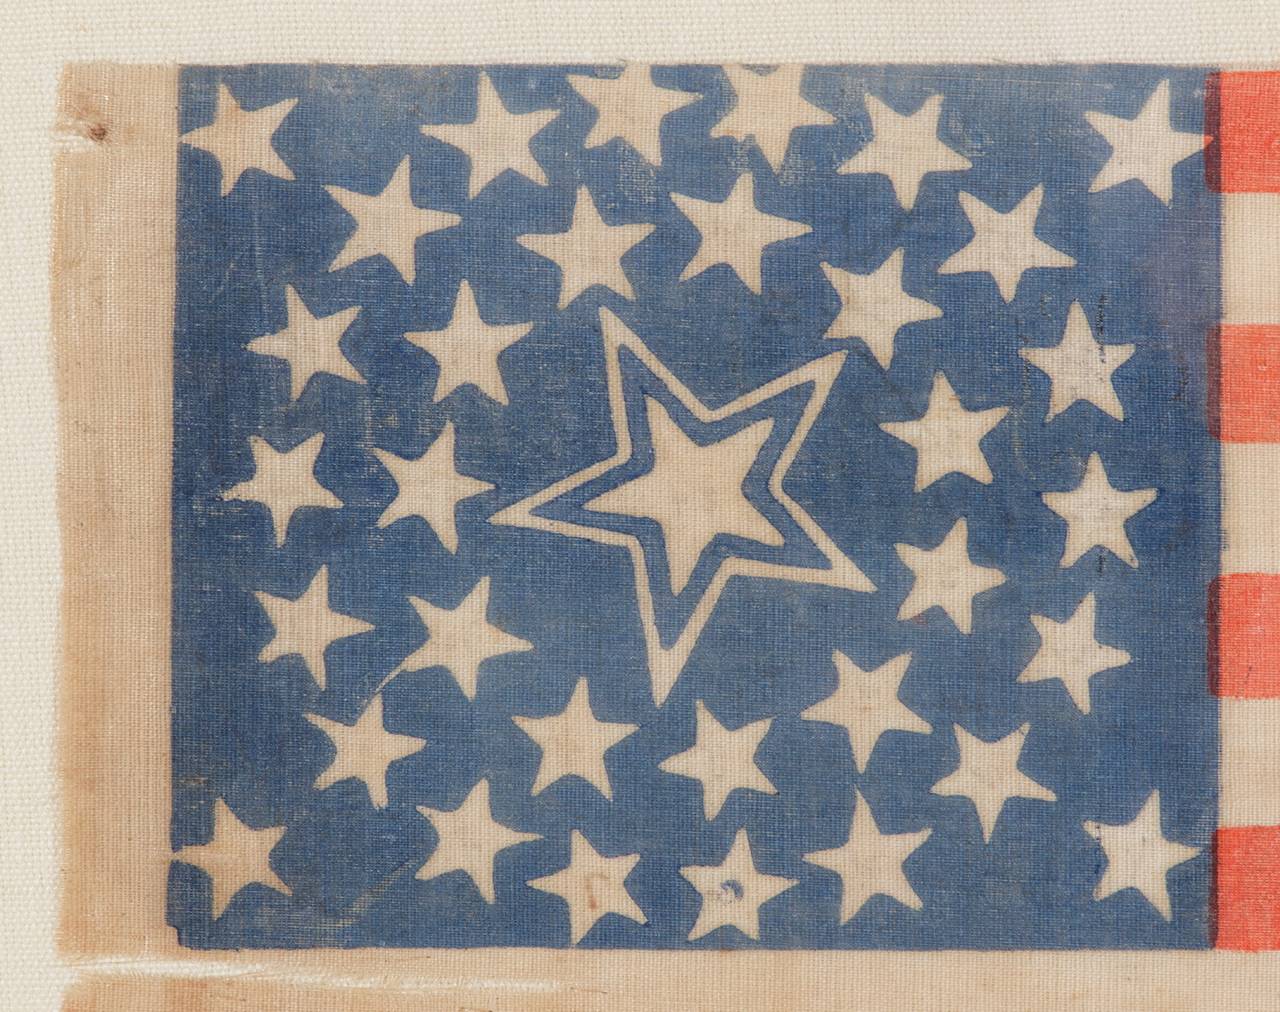 American 34 Star Flag in a Medallion Configuration with a Large Haloed Center Star